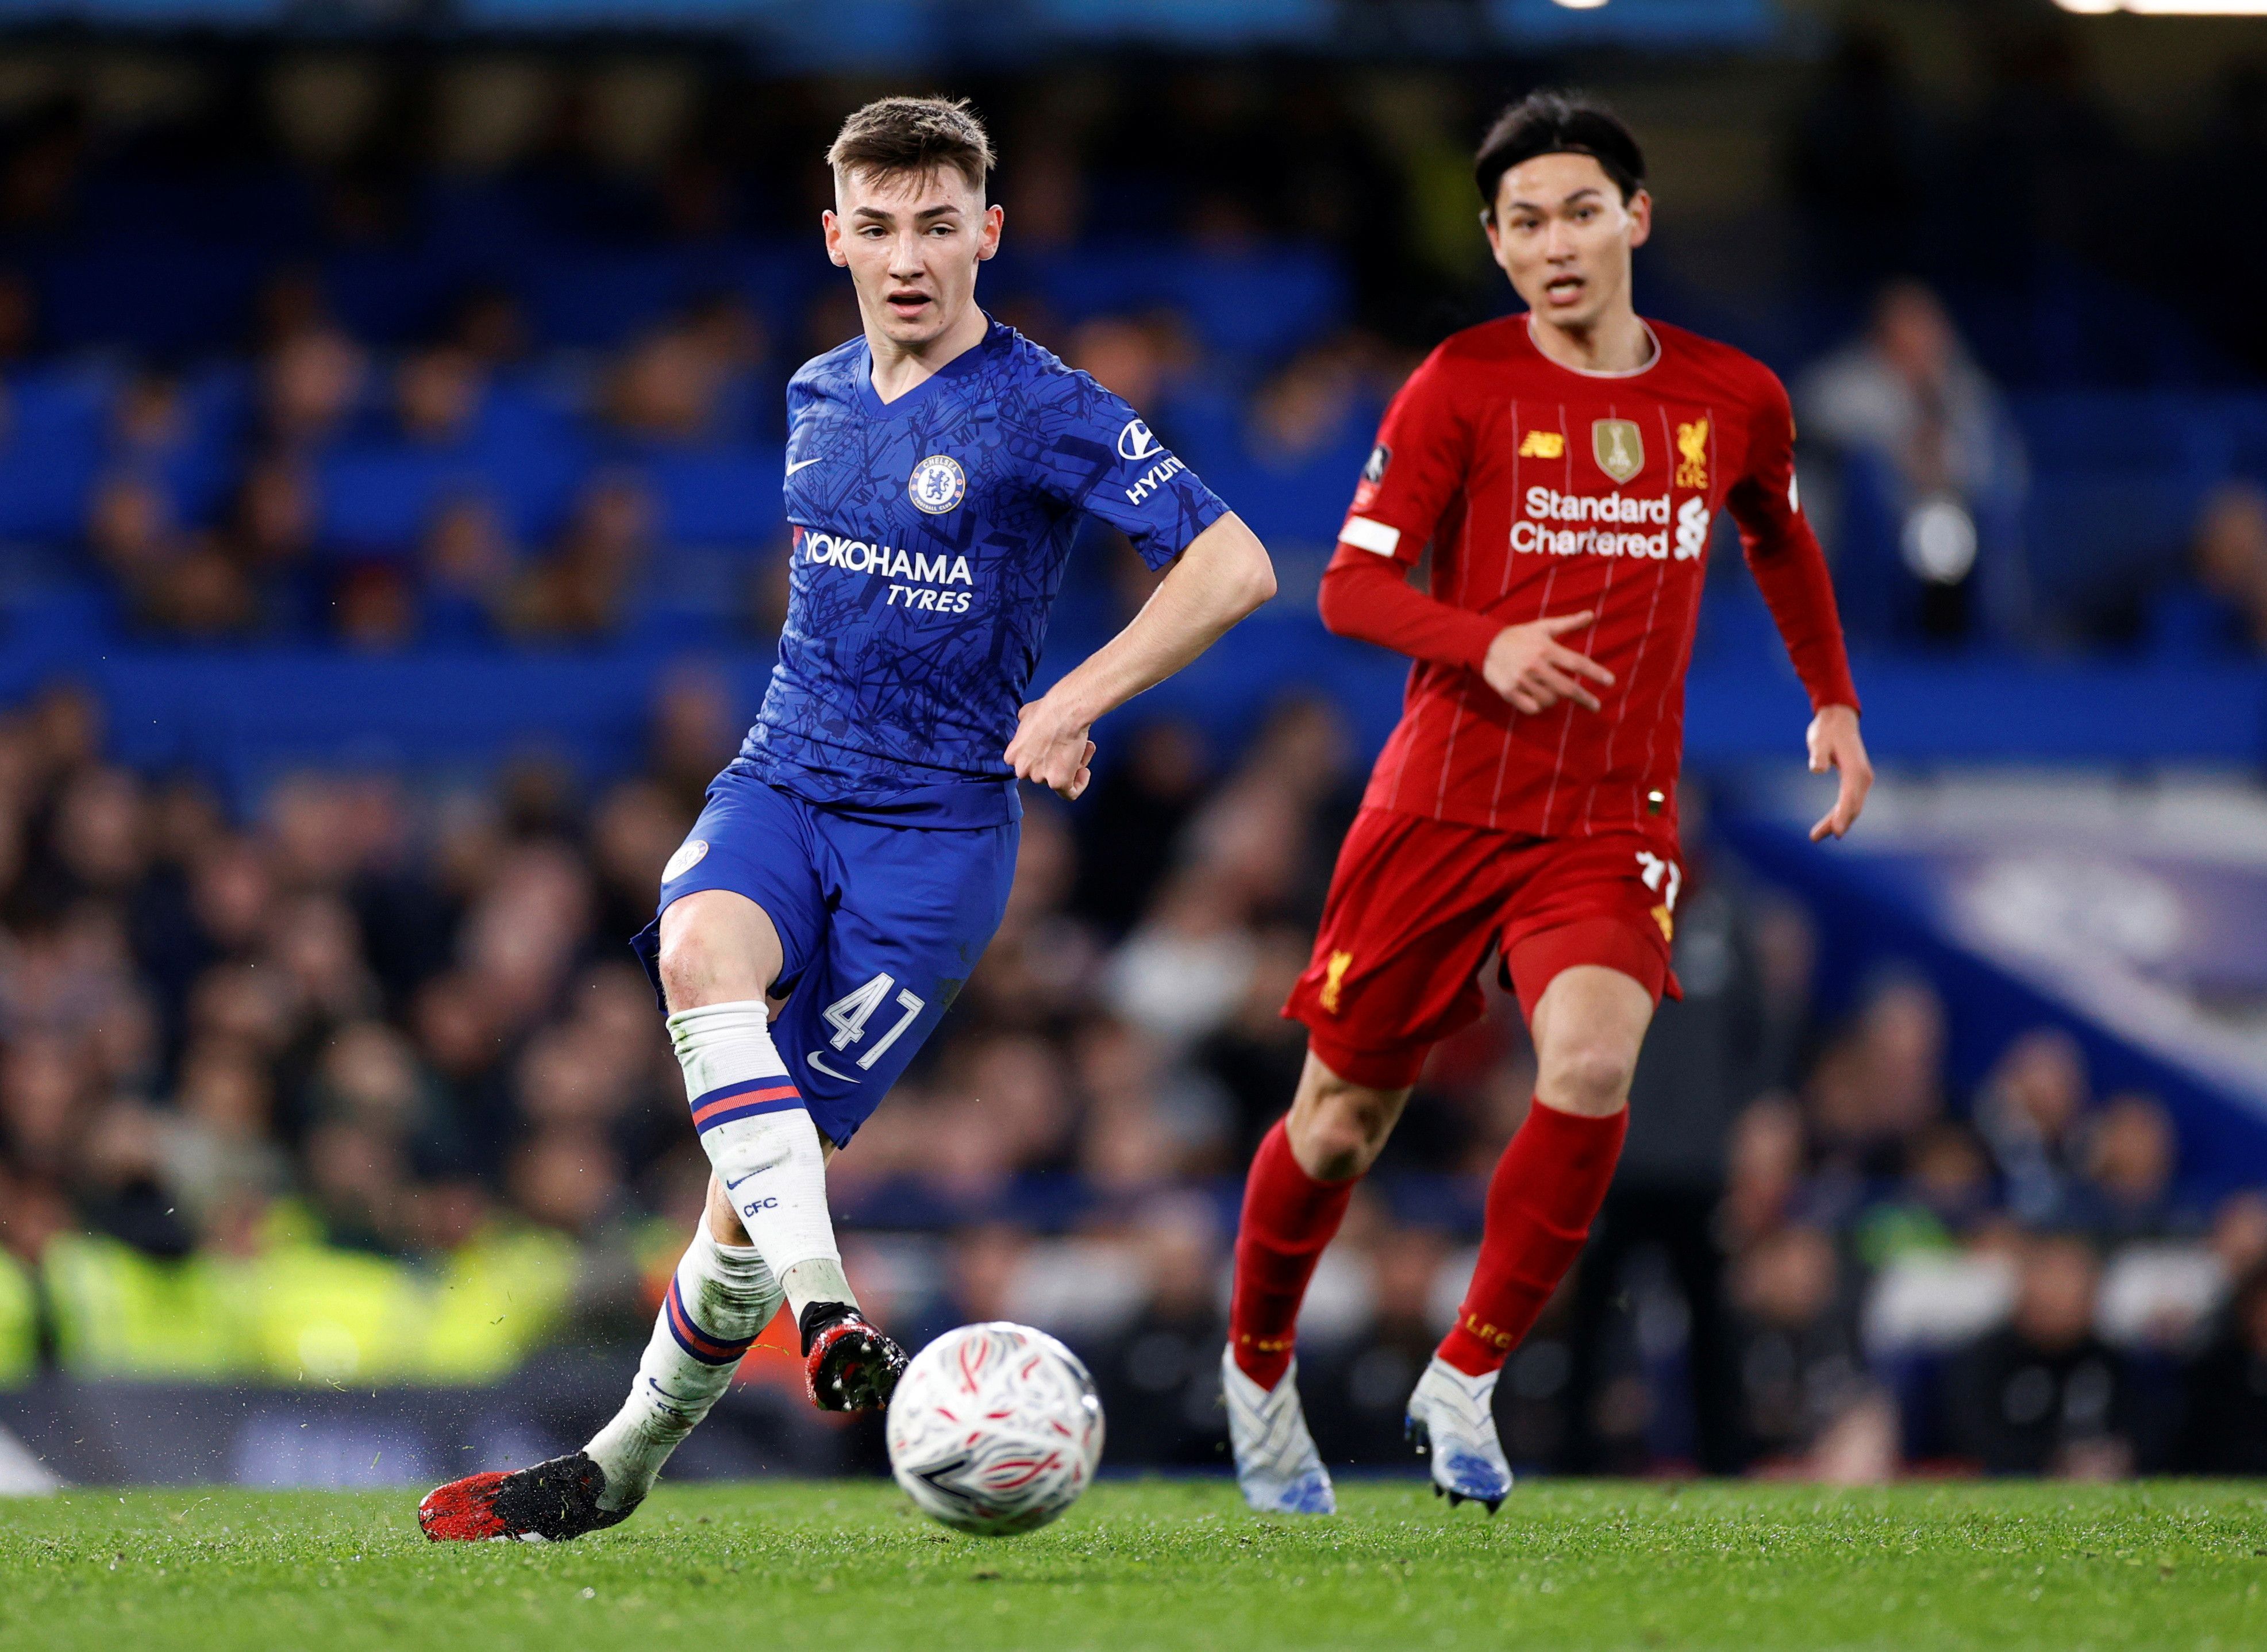 Chelsea starlet Billy Gilmour stuns Fabinho with brilliant skill